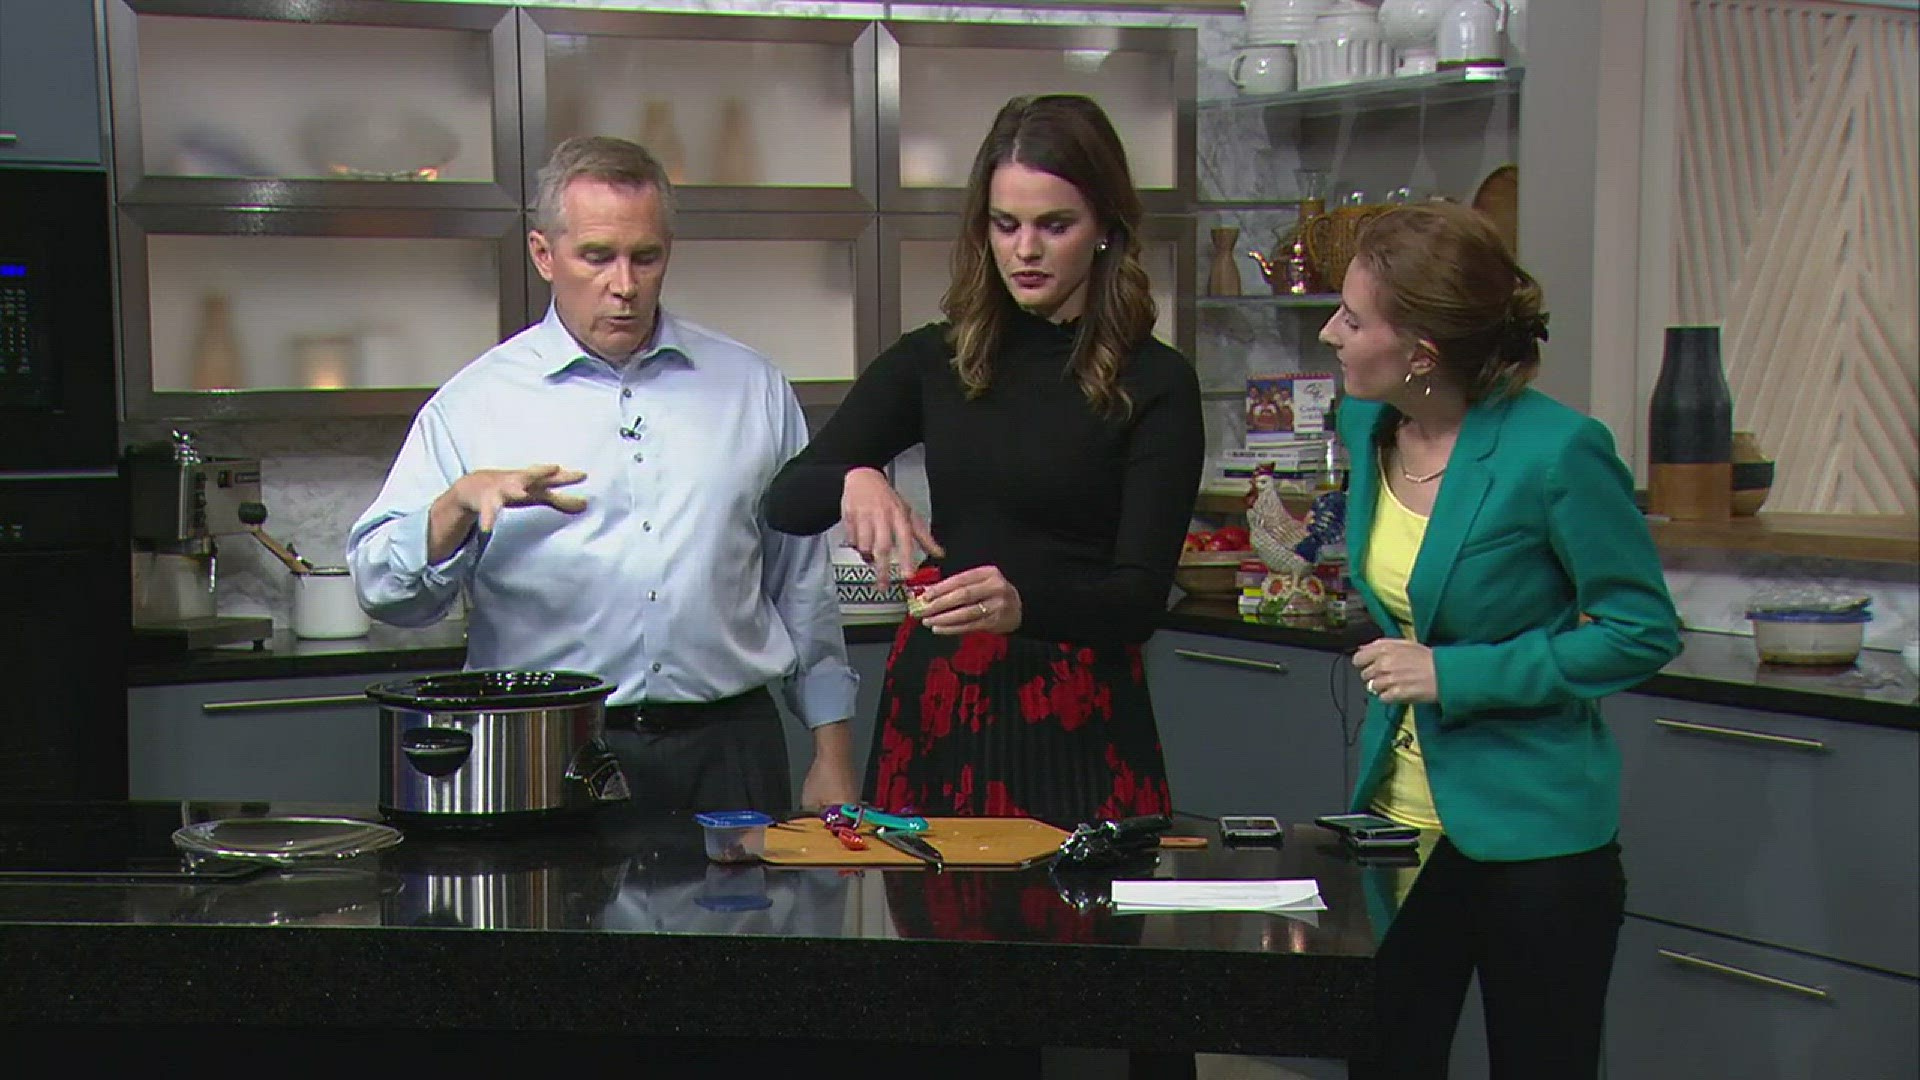 With fall settling in over MN, it is a perfect time to start collecting new soup recipes. Tim McNiff shares his favorite, in today's installment of KARE in the Kitchen.